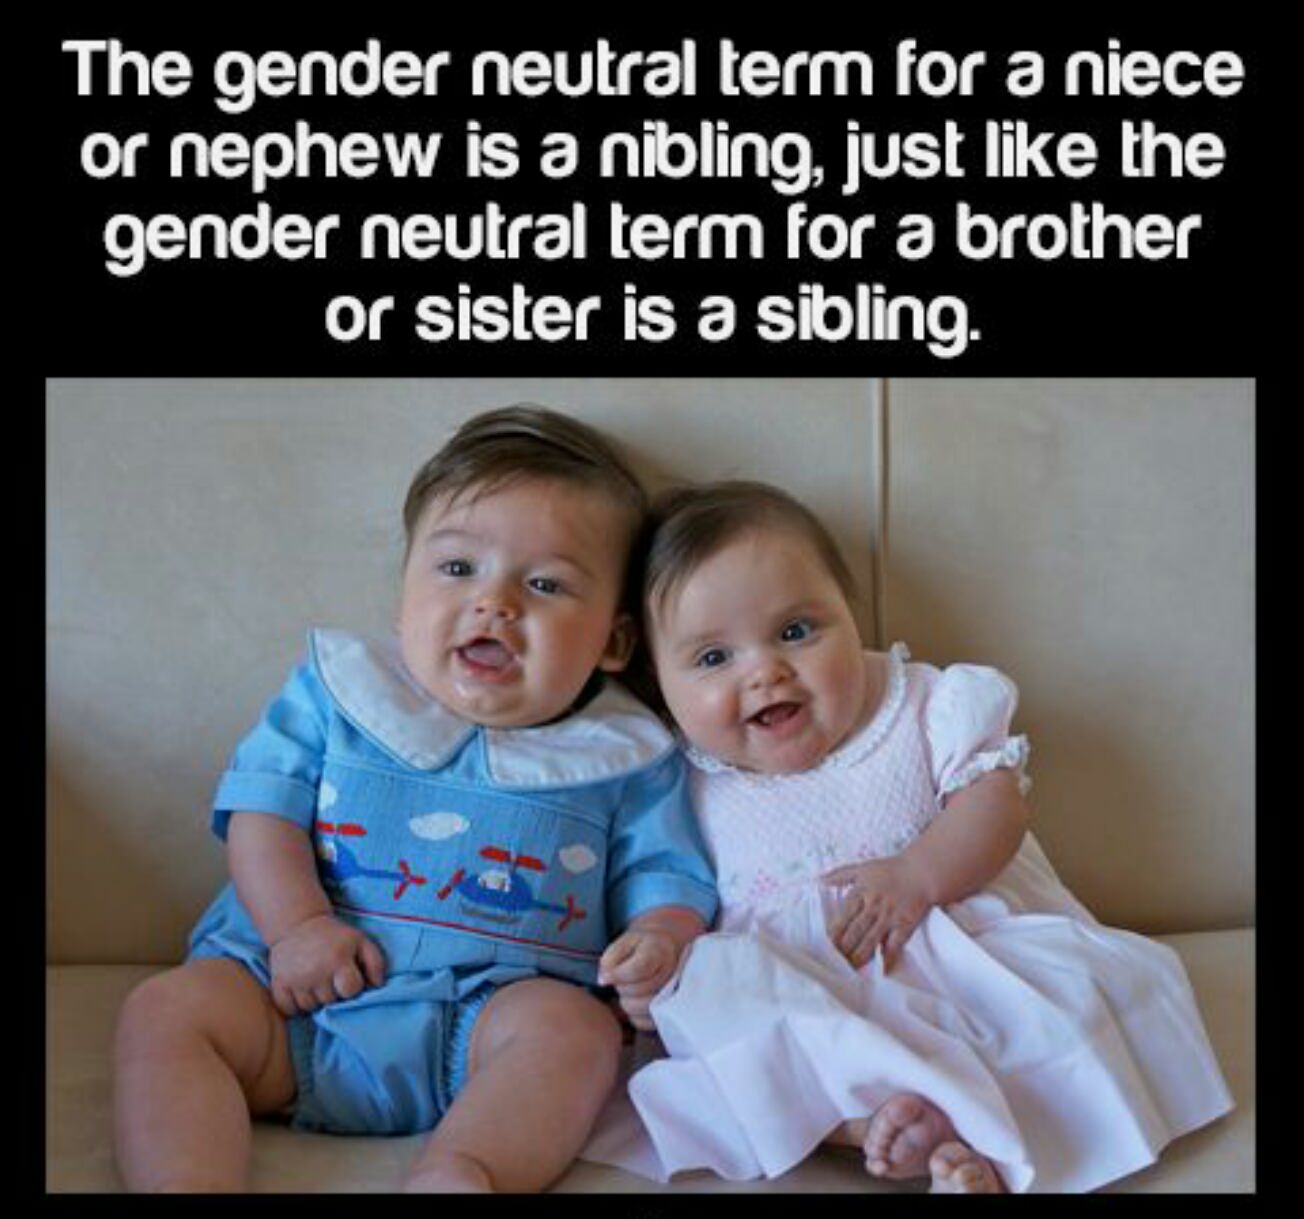 gender neutral term for brother - The gender neutral term for a niece or nephew is a nibling, just the gender neutral term for a brother or sister is a sibling.